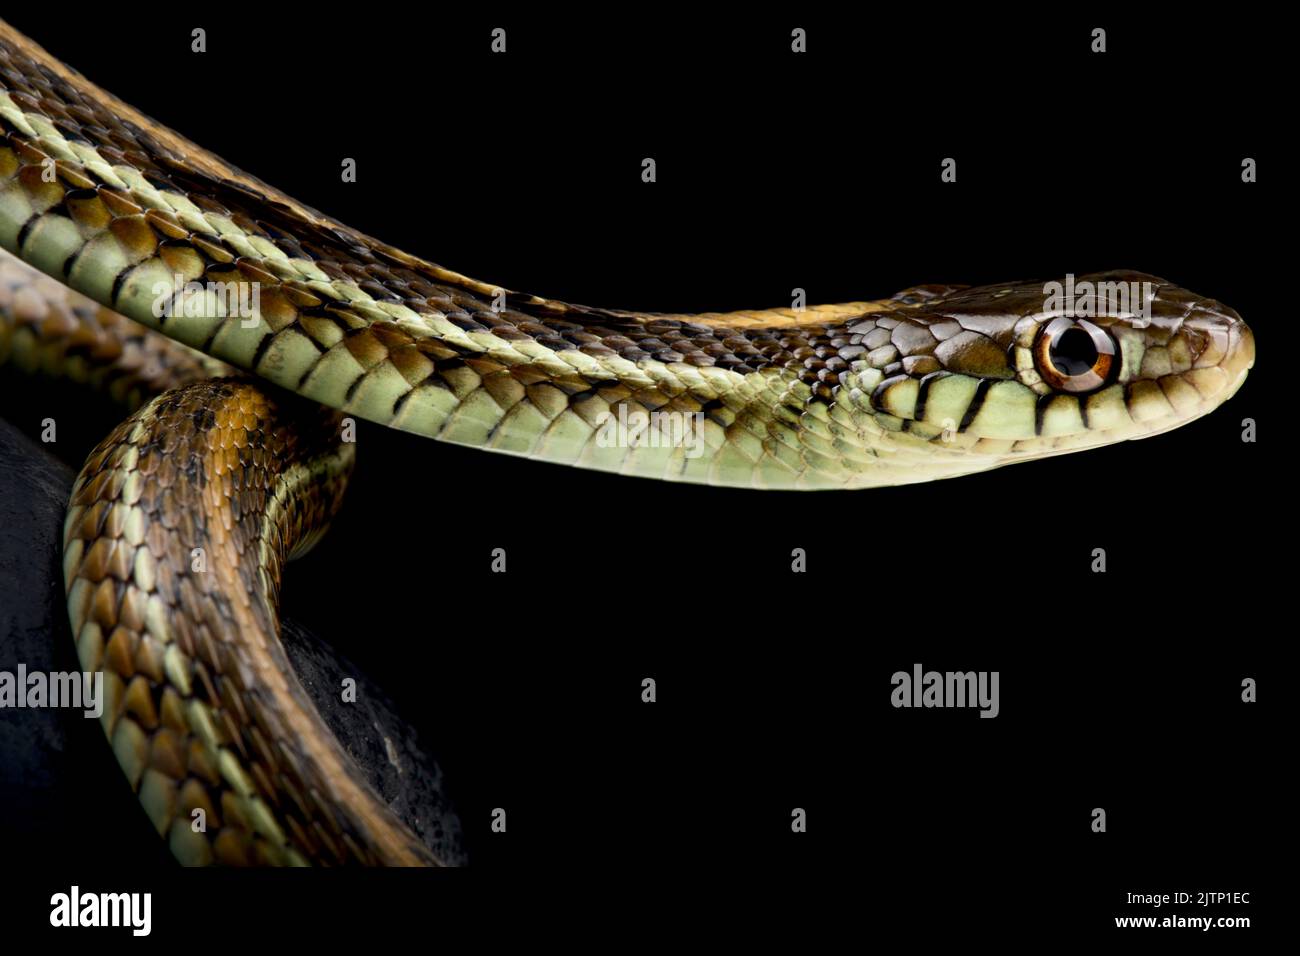 The Atotonilco Garter Snake (Thamnophis eques diluvialis) is endemic to Lake Chapala in Mexico. Stock Photo